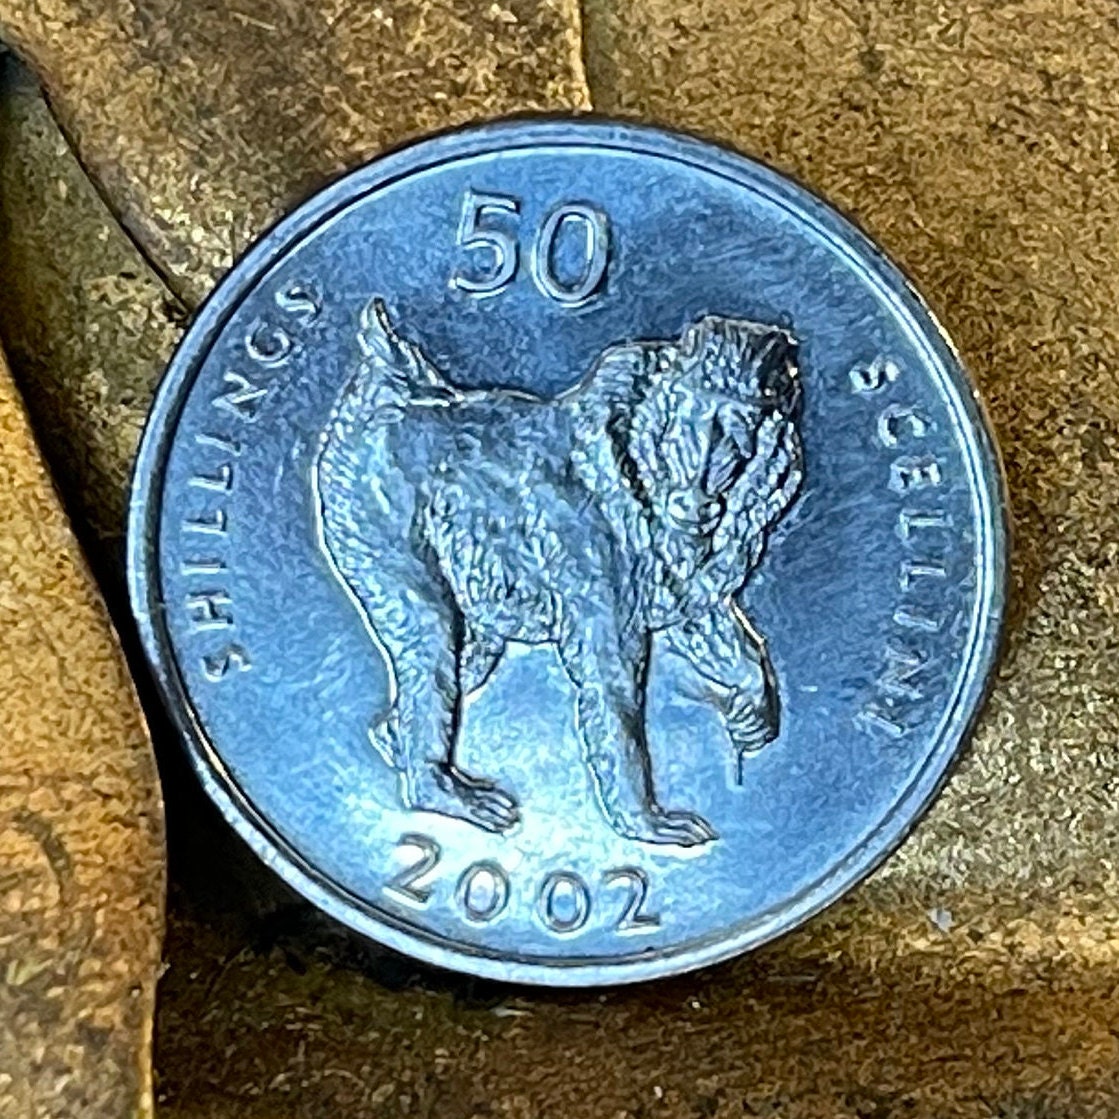 Mandrill 50 Shillings Somalia Authentic Coin Money for Jewelry and Craft Making